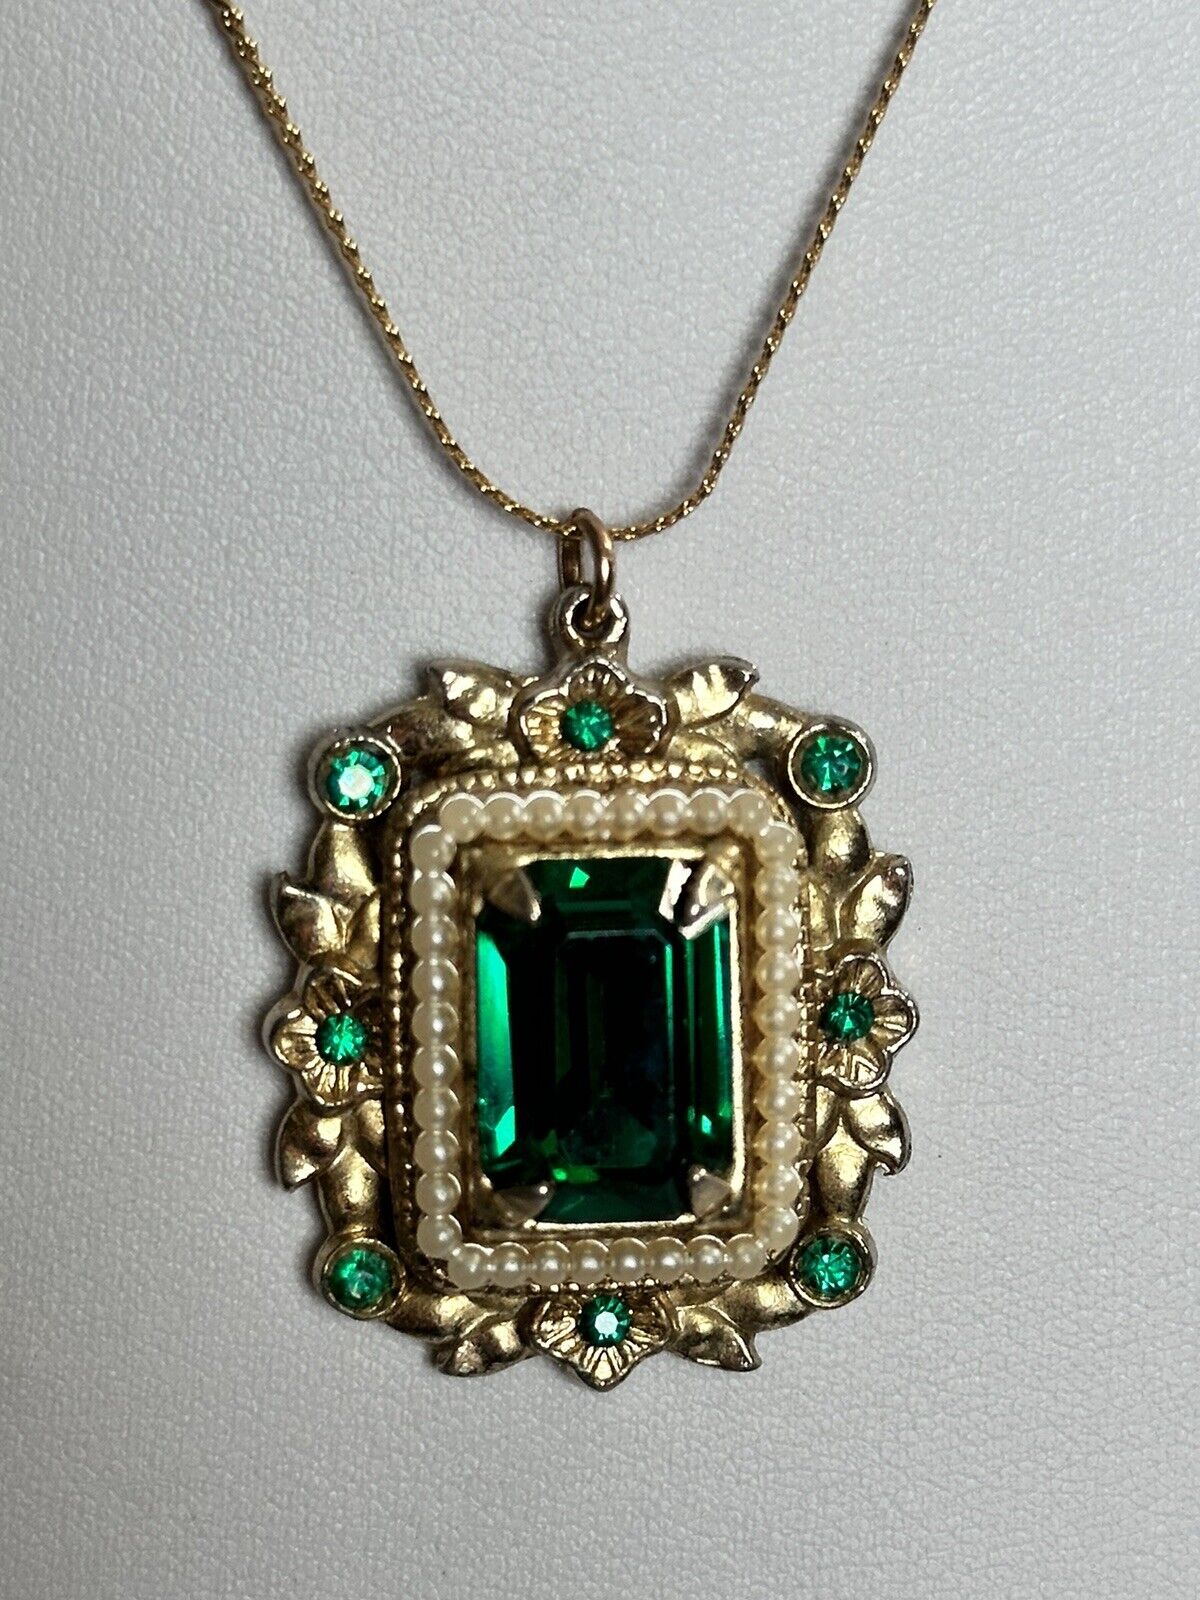 Vintage Coro Signed Green Stone Faux Pearl Pendant Necklace